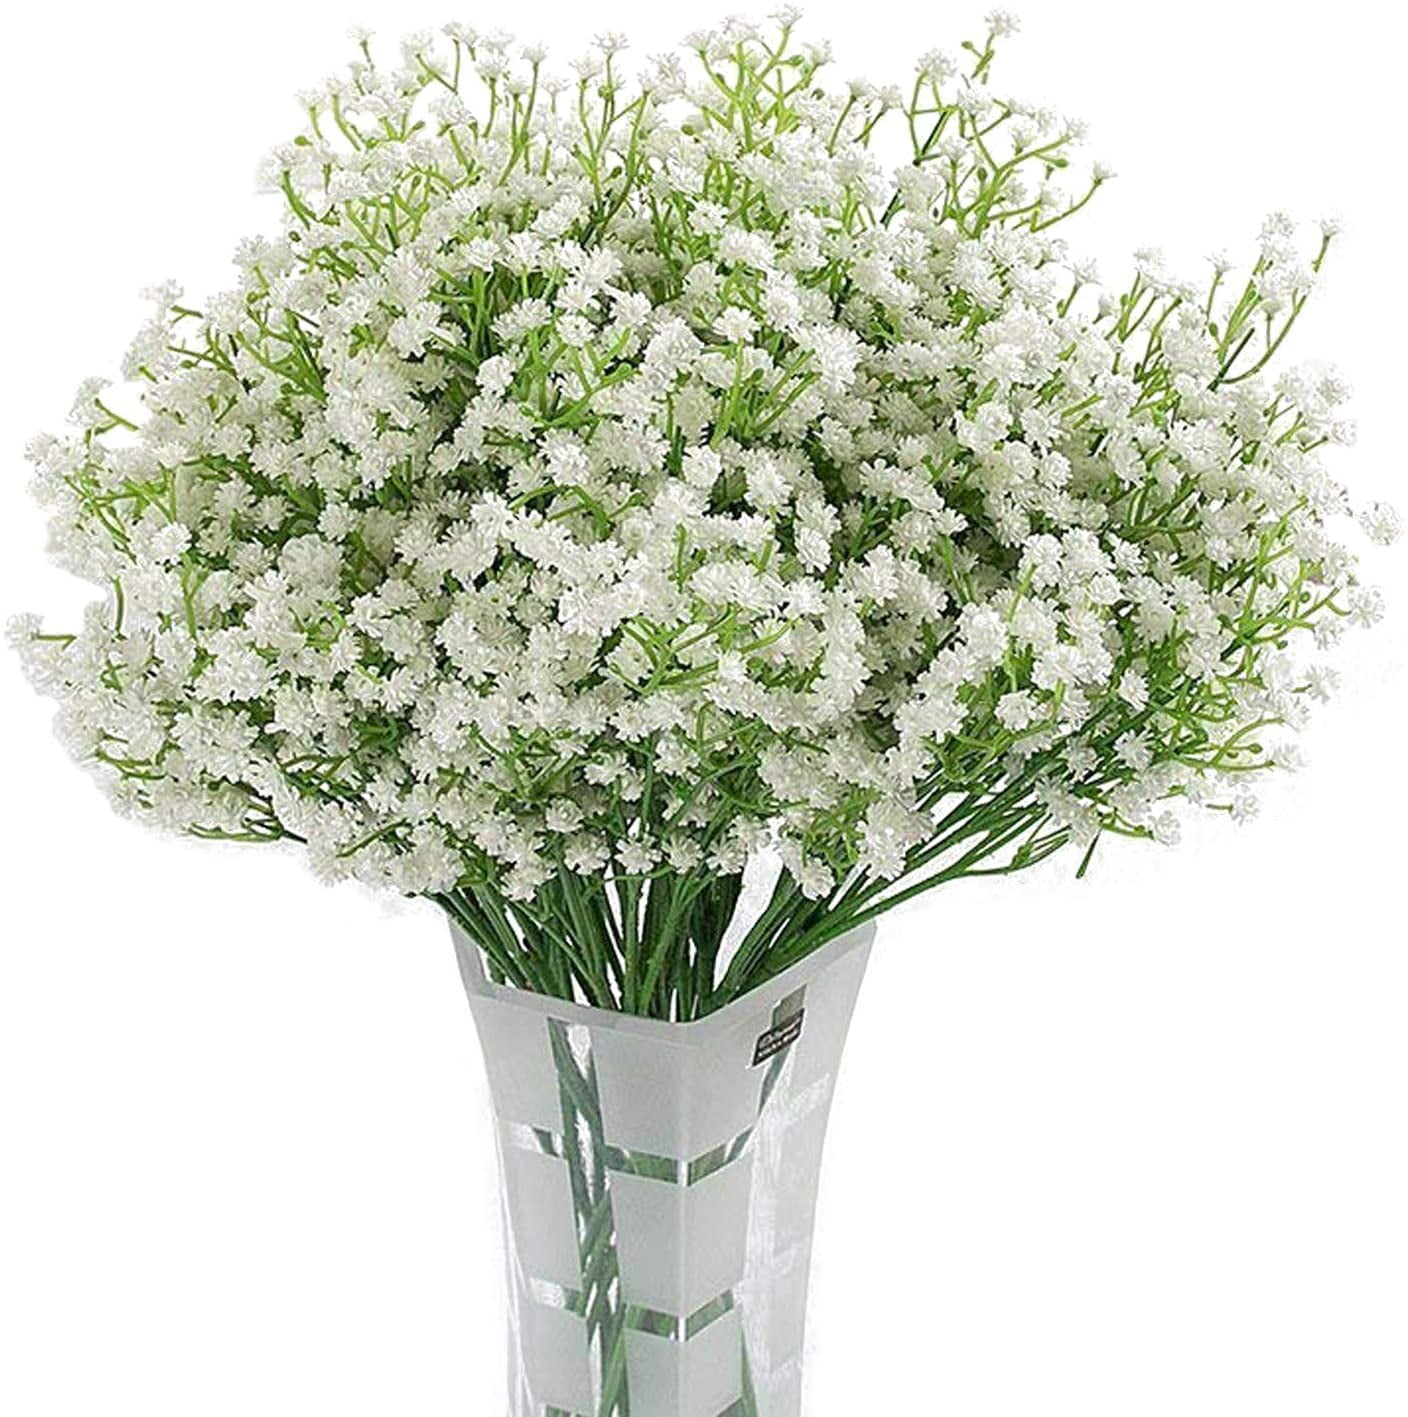  VICASKY 50 Artificial Plant Eucalyptus Grass Tabletop  Accessories Diamonds for Flower Bouquets Raindrop Garland Artificial Flower  Beaded stem Bead Drops Gypsophila White Bride Branch : Arts, Crafts & Sewing